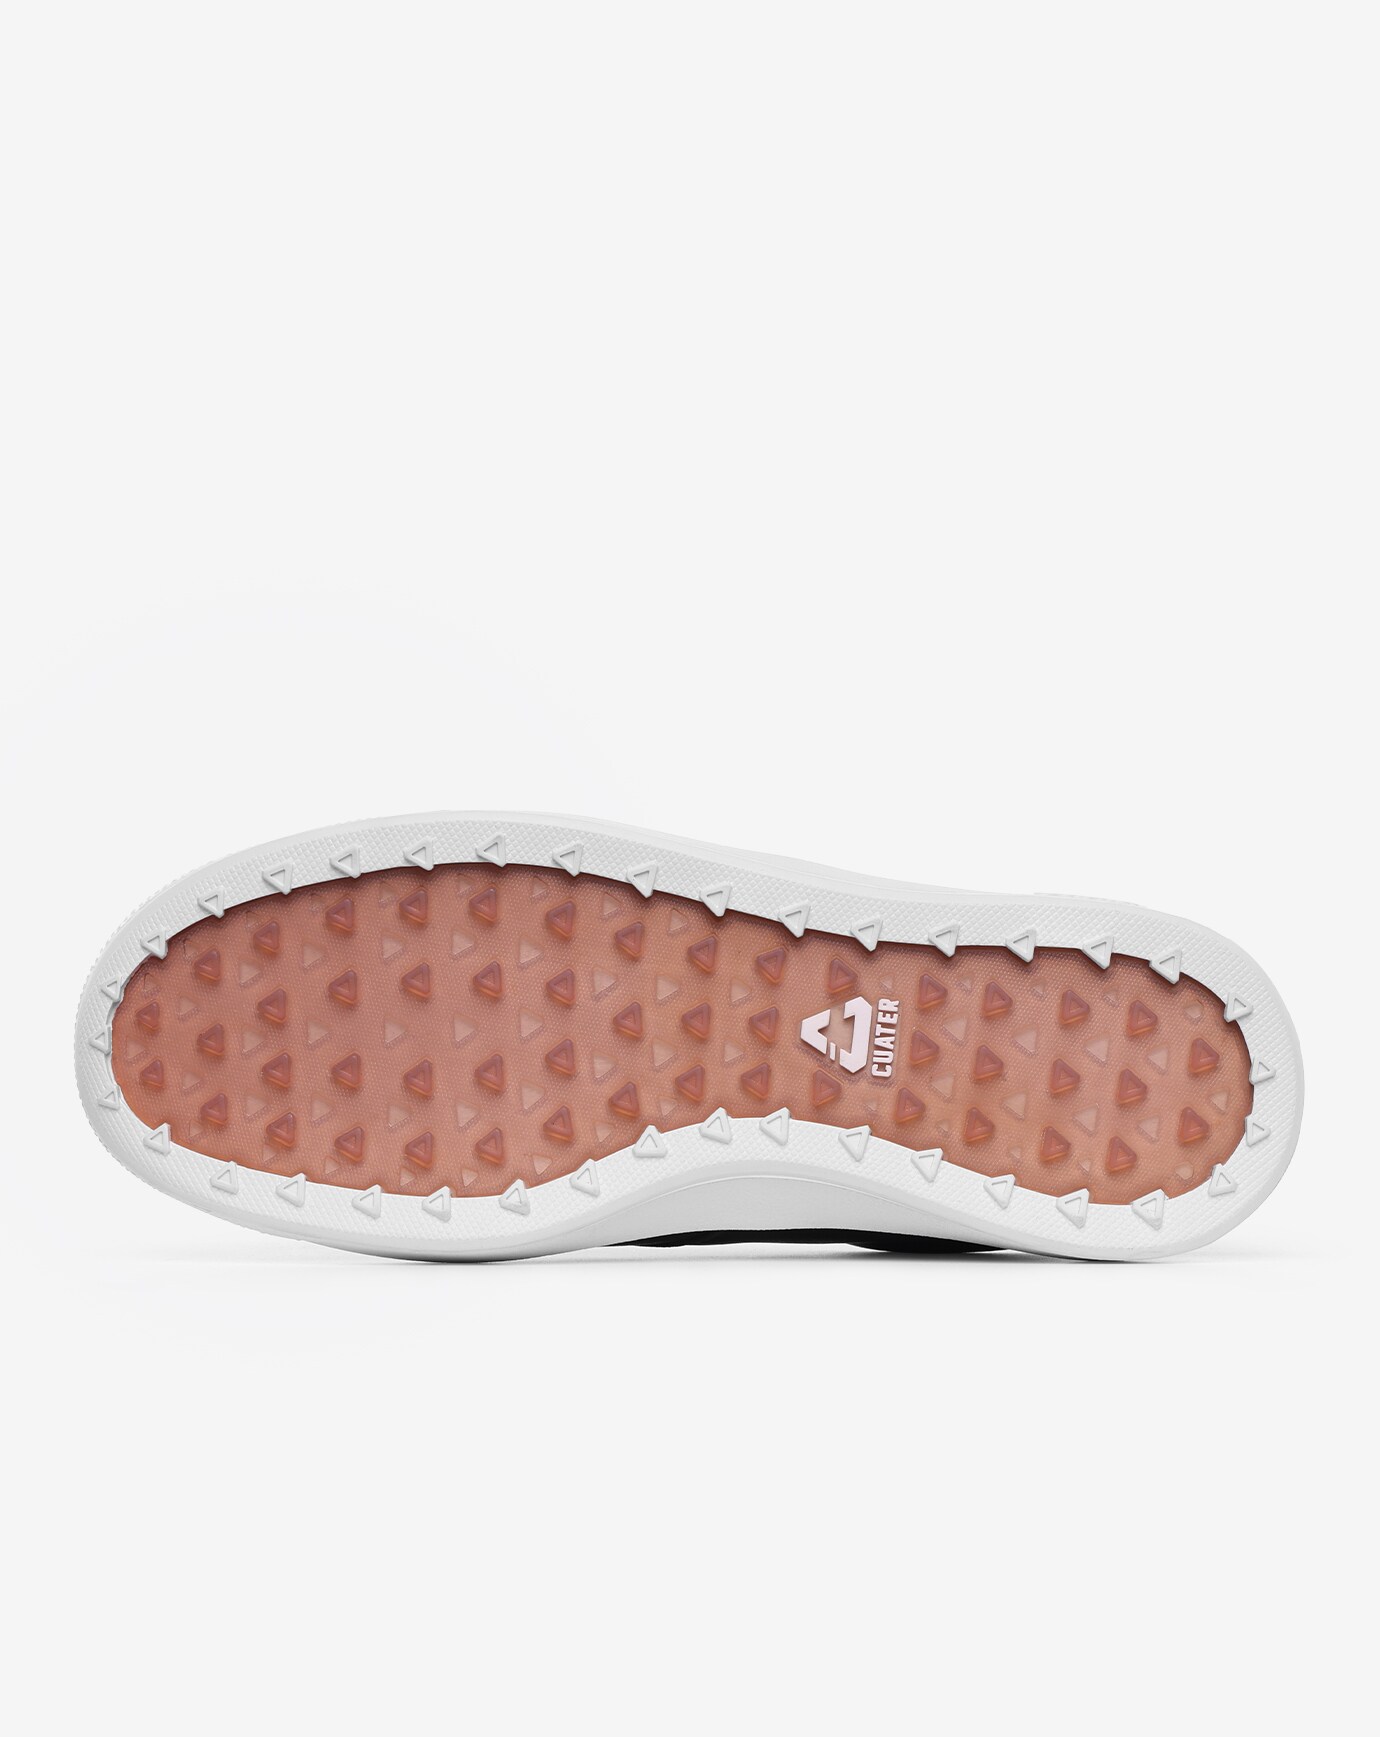 THE WILDCARD LEATHER SPIKELESS GOLF SHOE Image 2